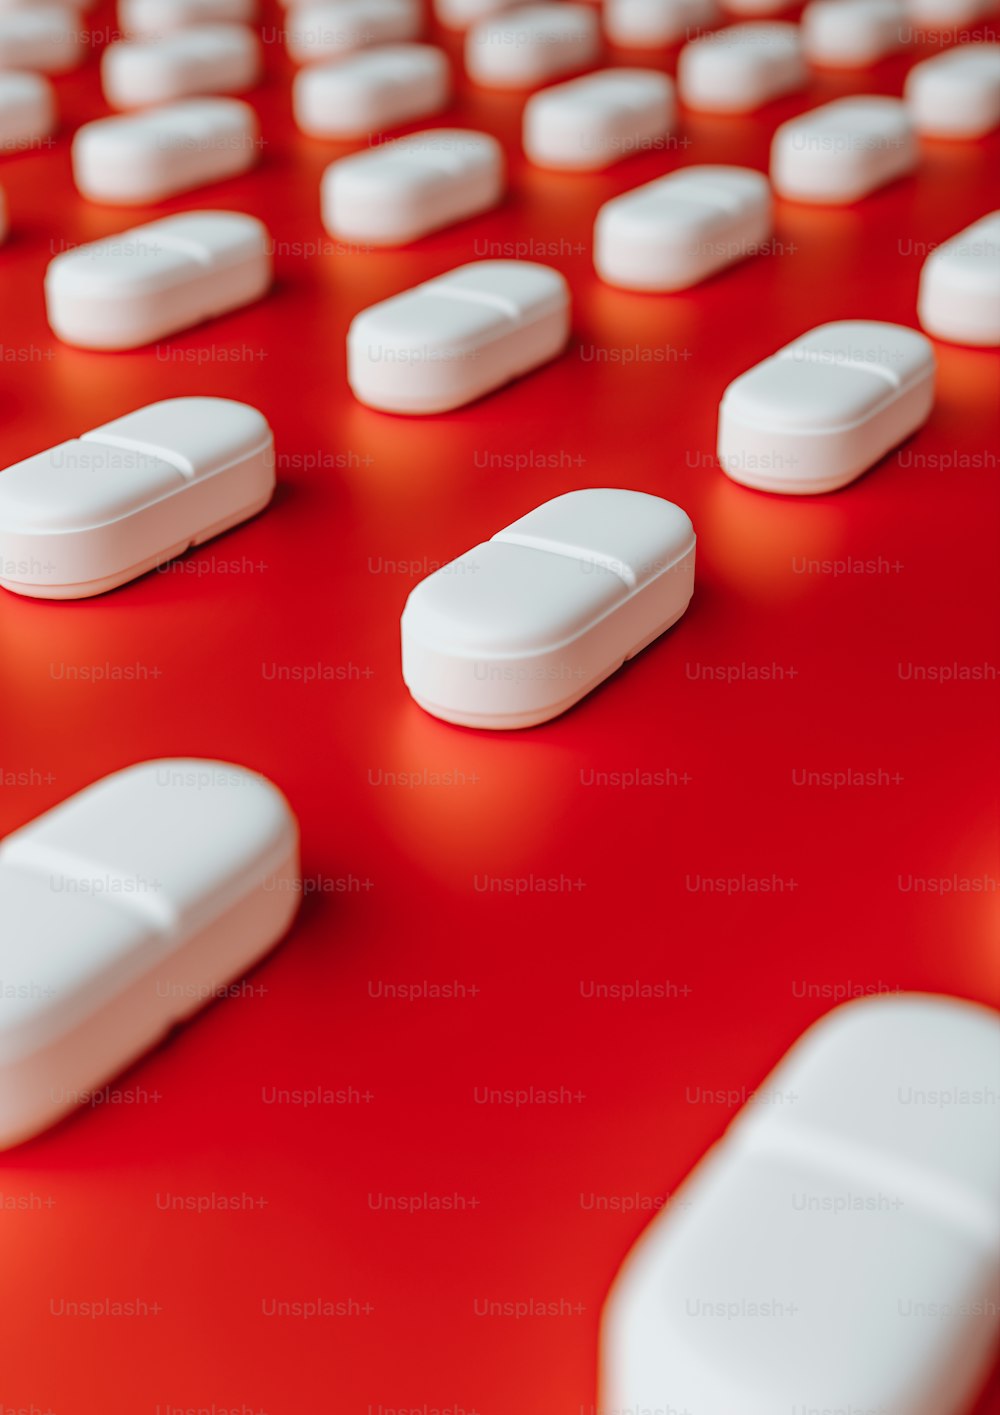 many white pills are arranged on a red surface